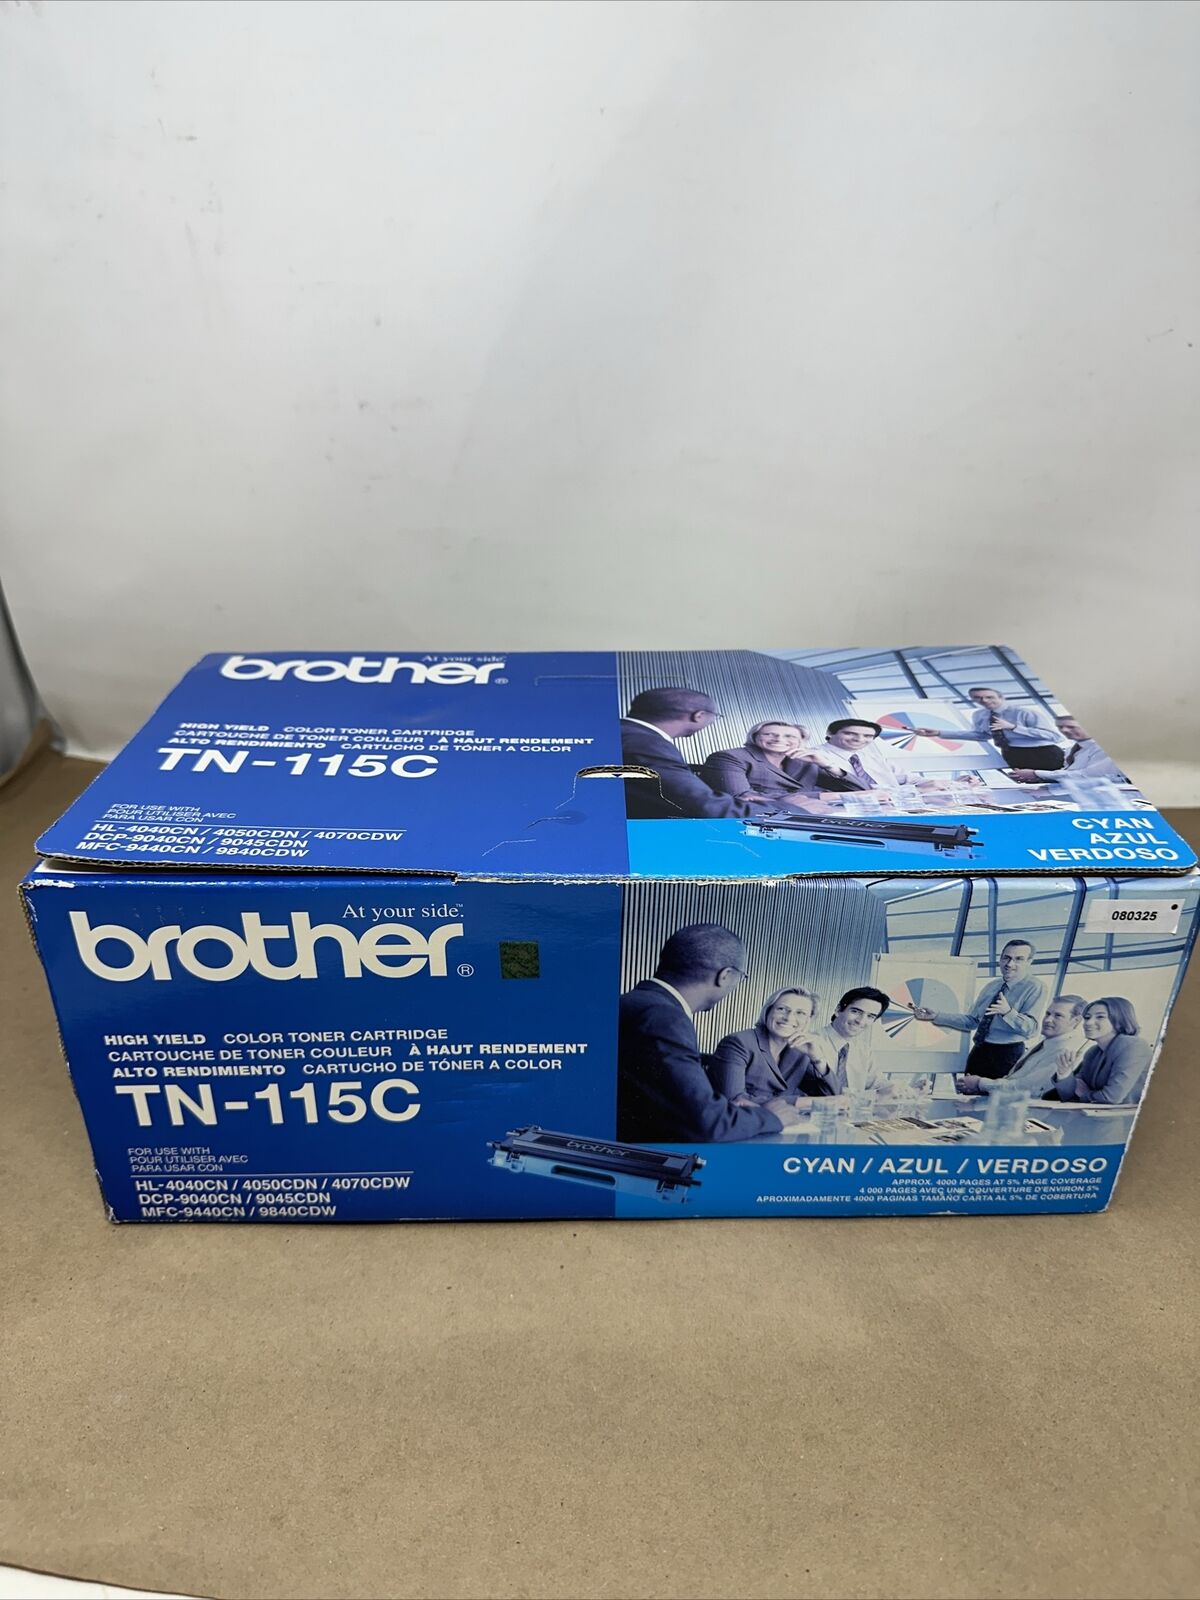 NEW Brother TN-115C Cyan Toner for DCP-9040 9042 9045 (31524C2)